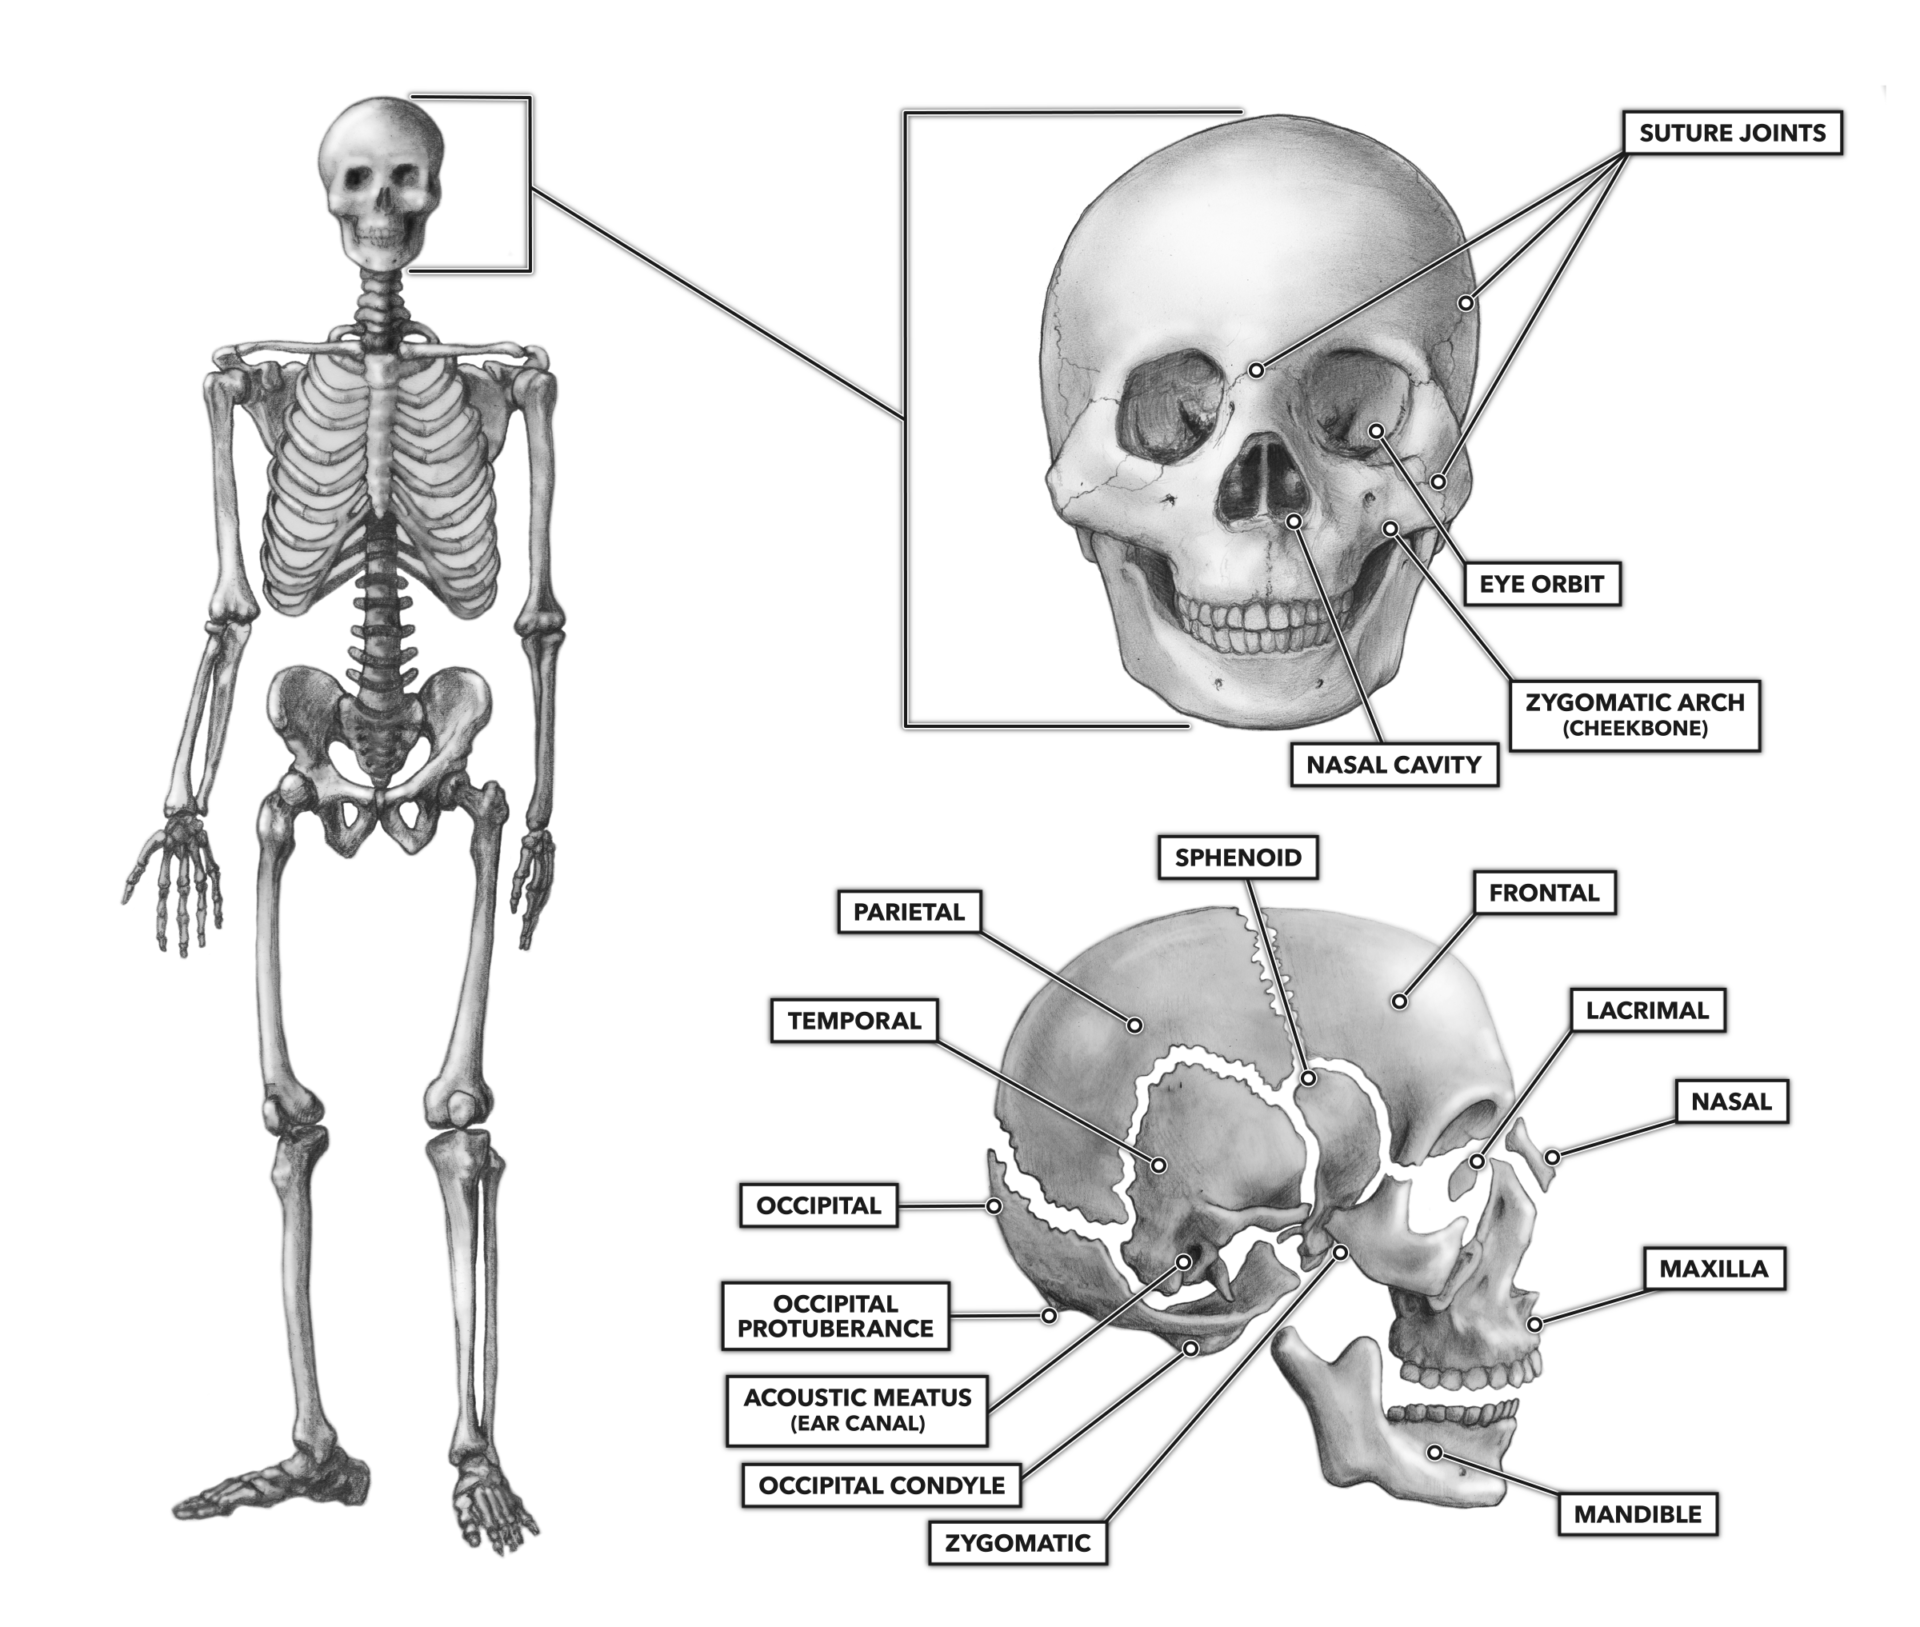 the extra bones that sometimes develop between the flat bones of the skull are called